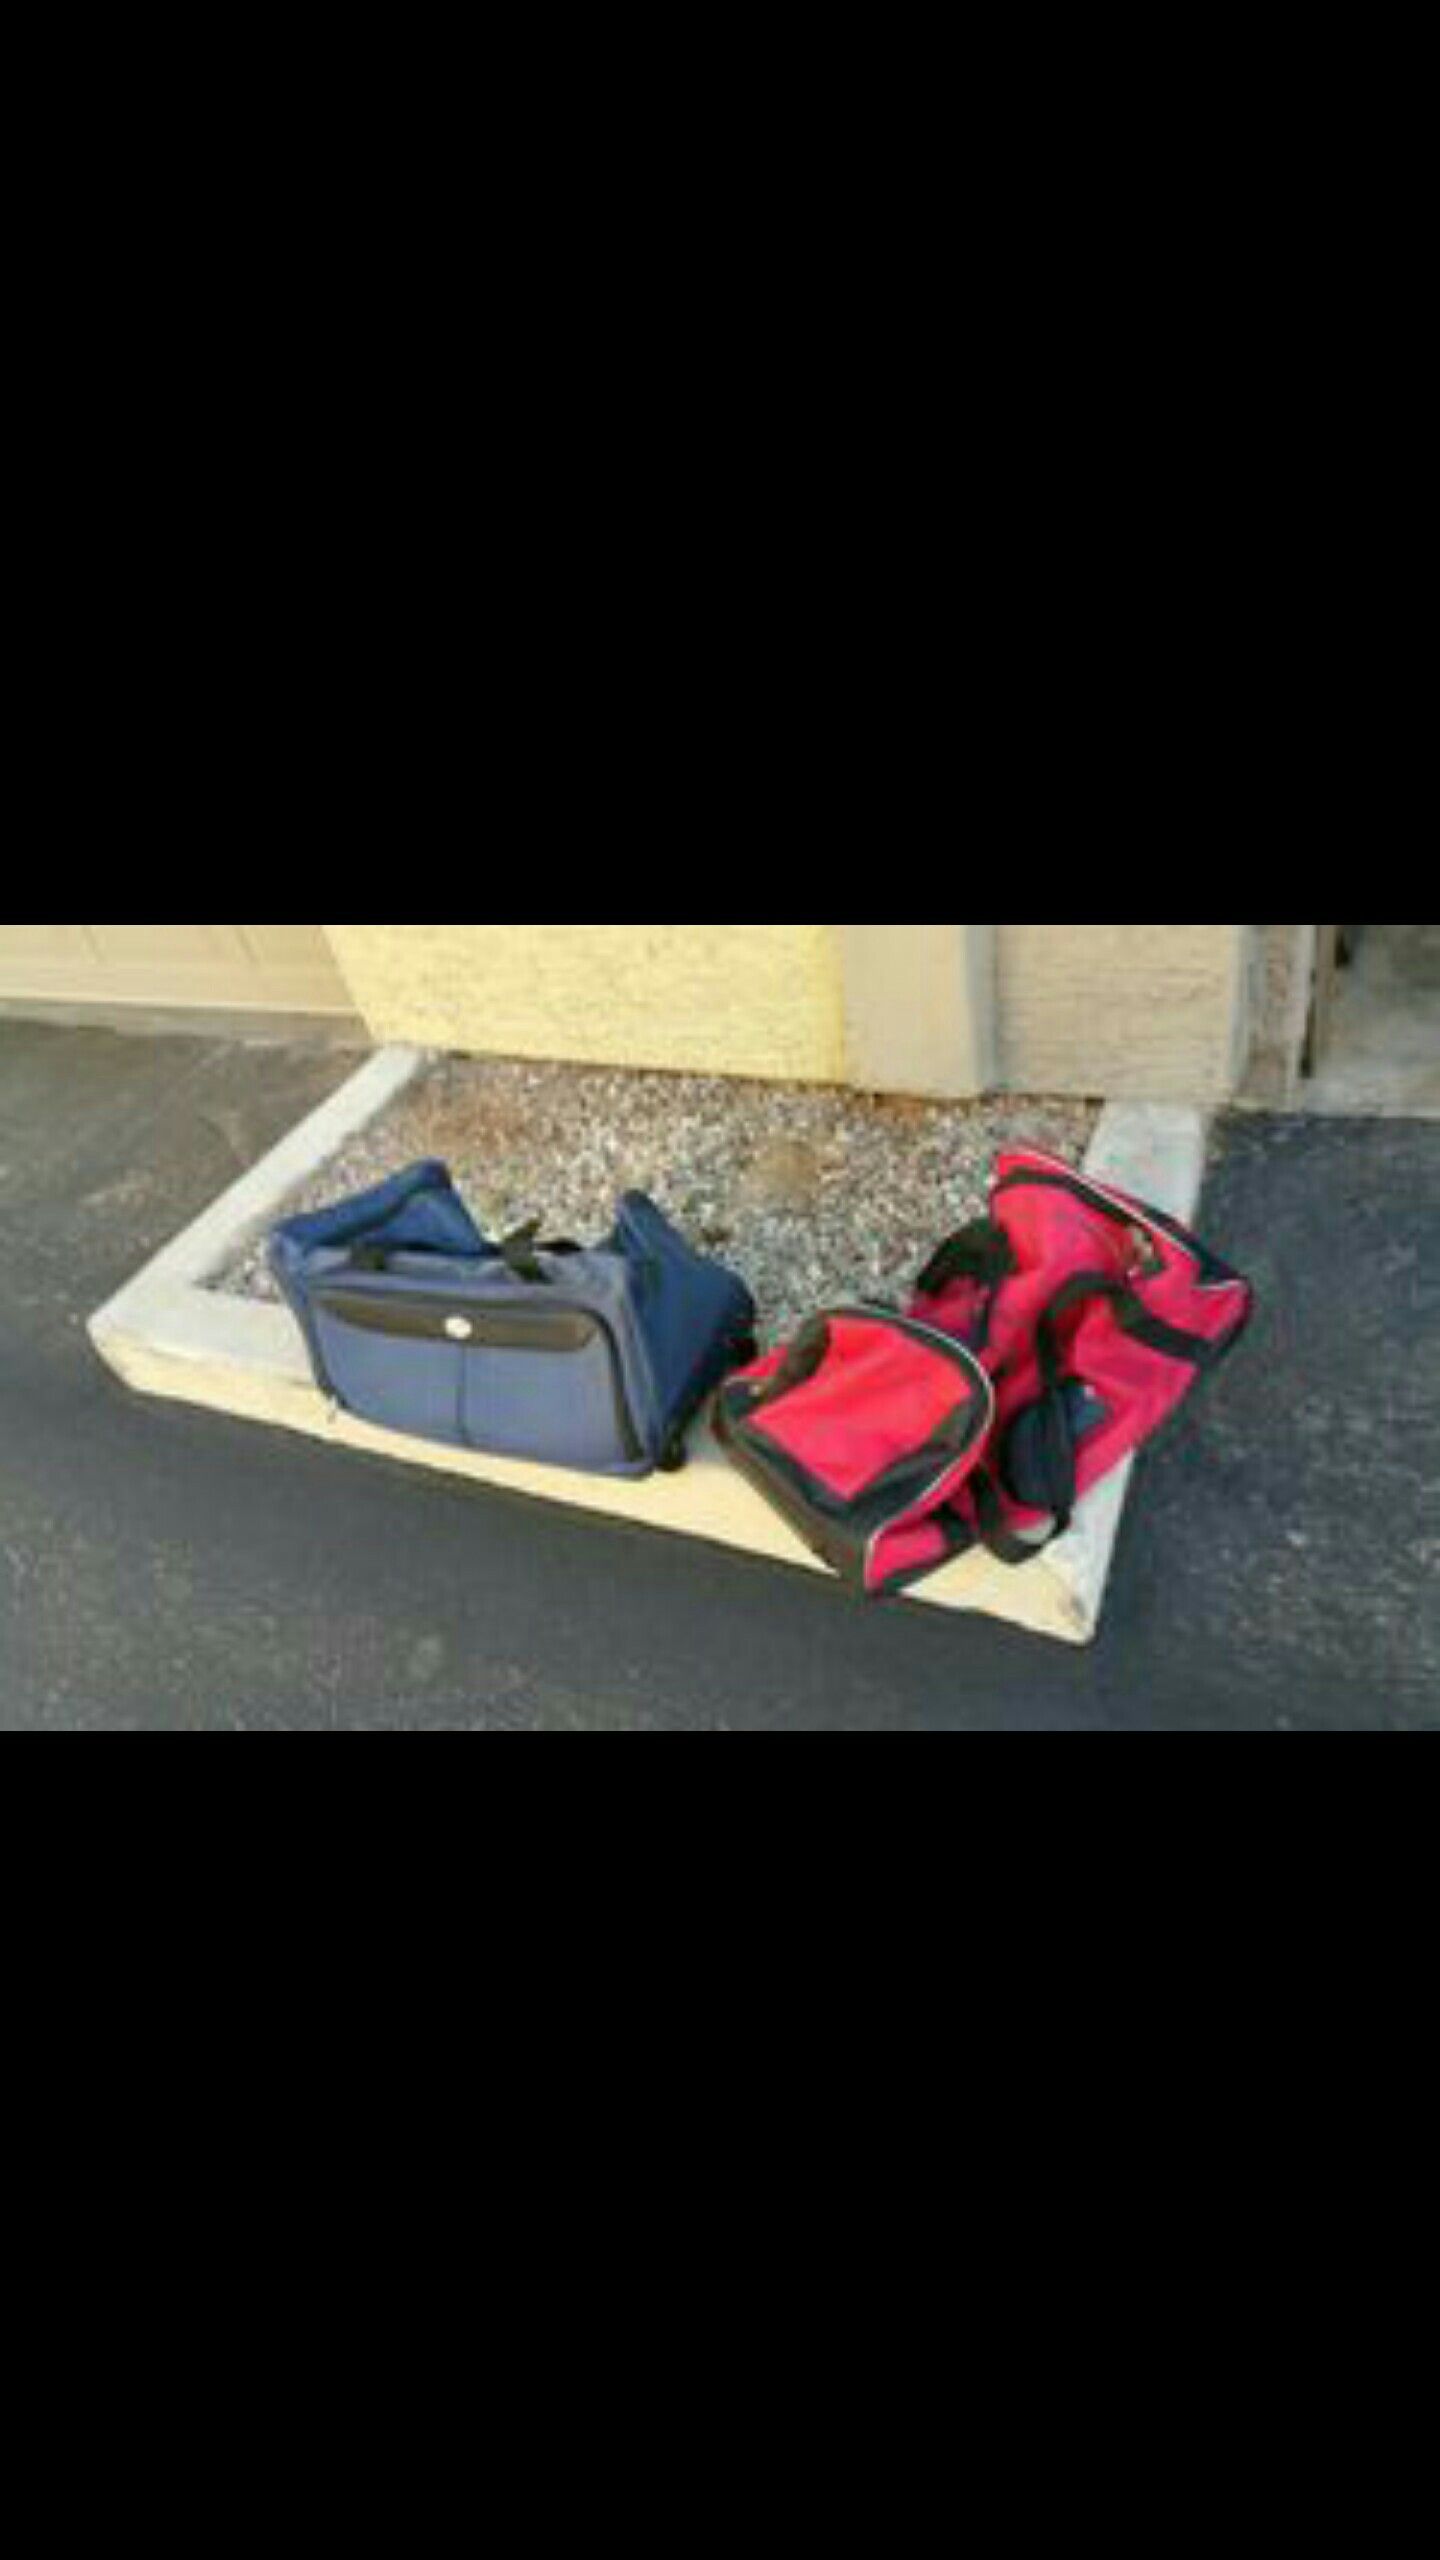 22" Duffle Bags transforms into Luggage